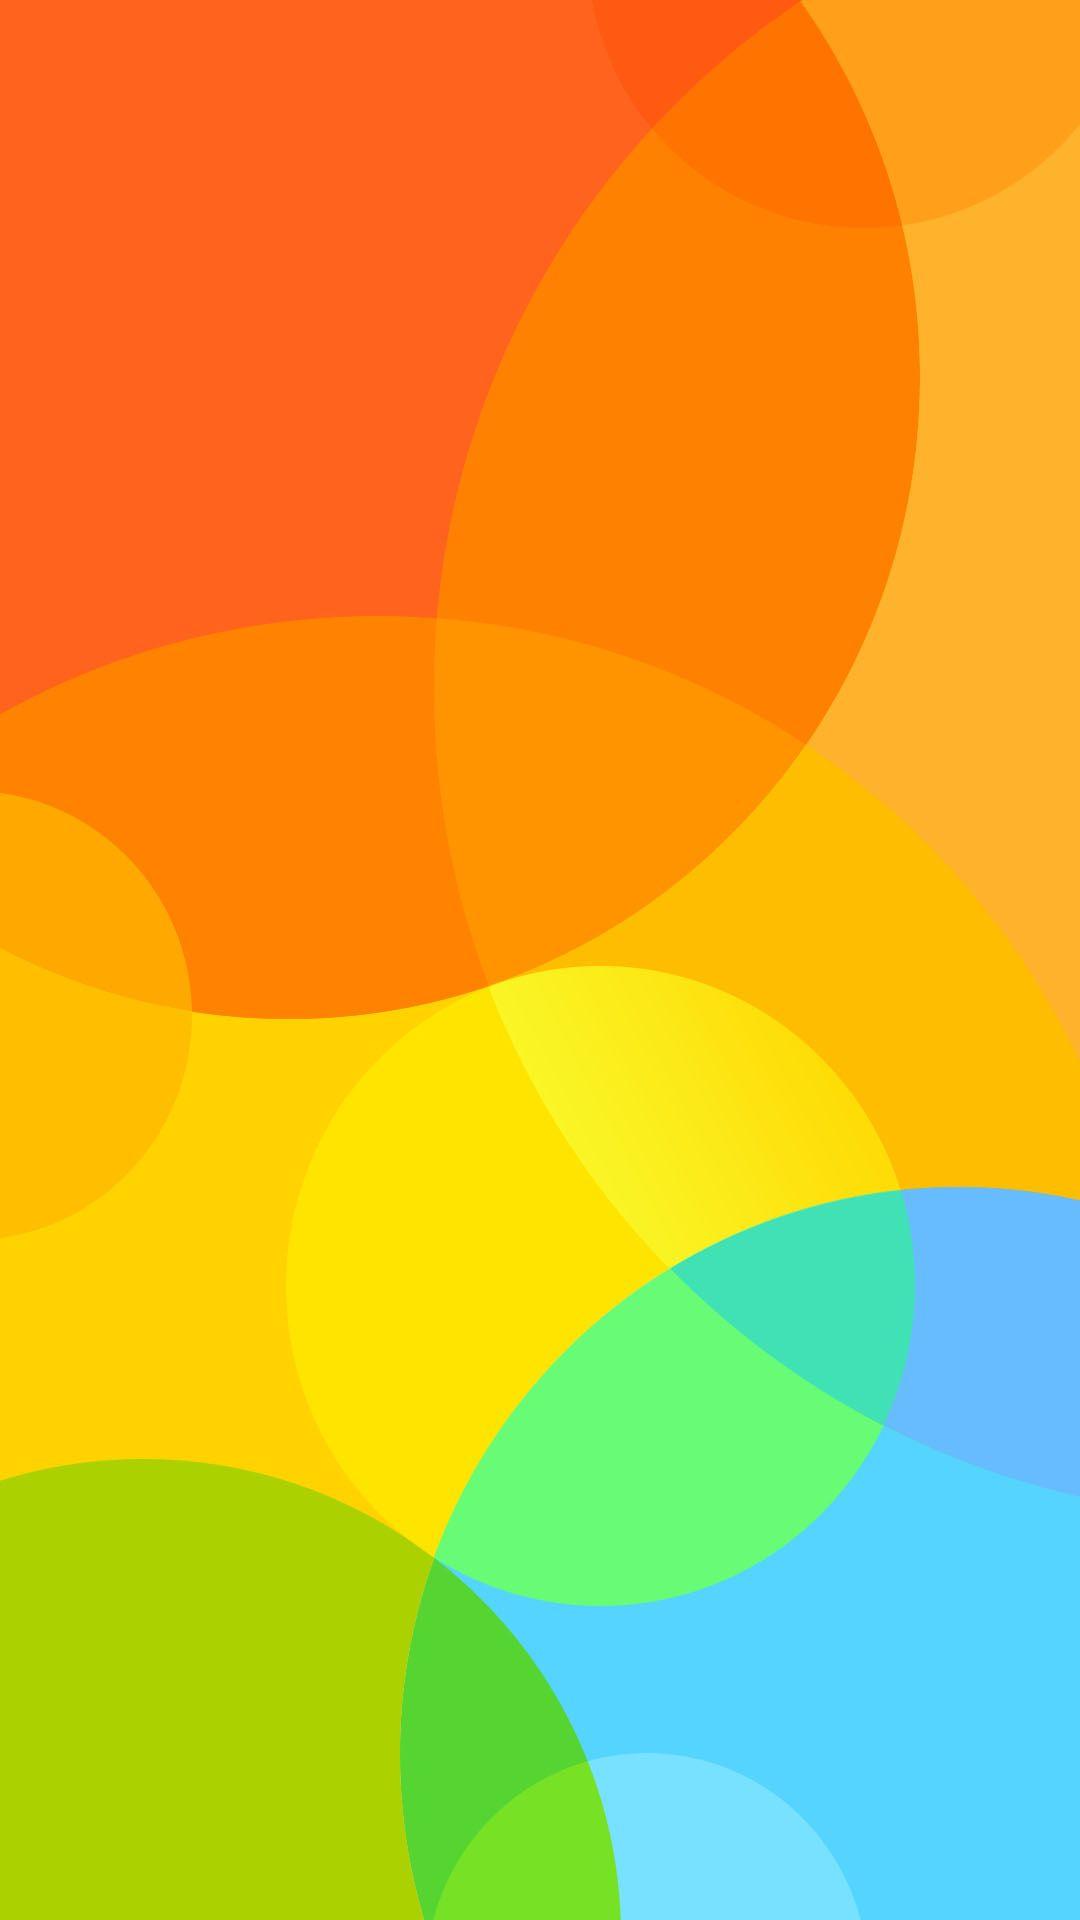 Download MIUI 6 HD Wallpaper for your Android Phone